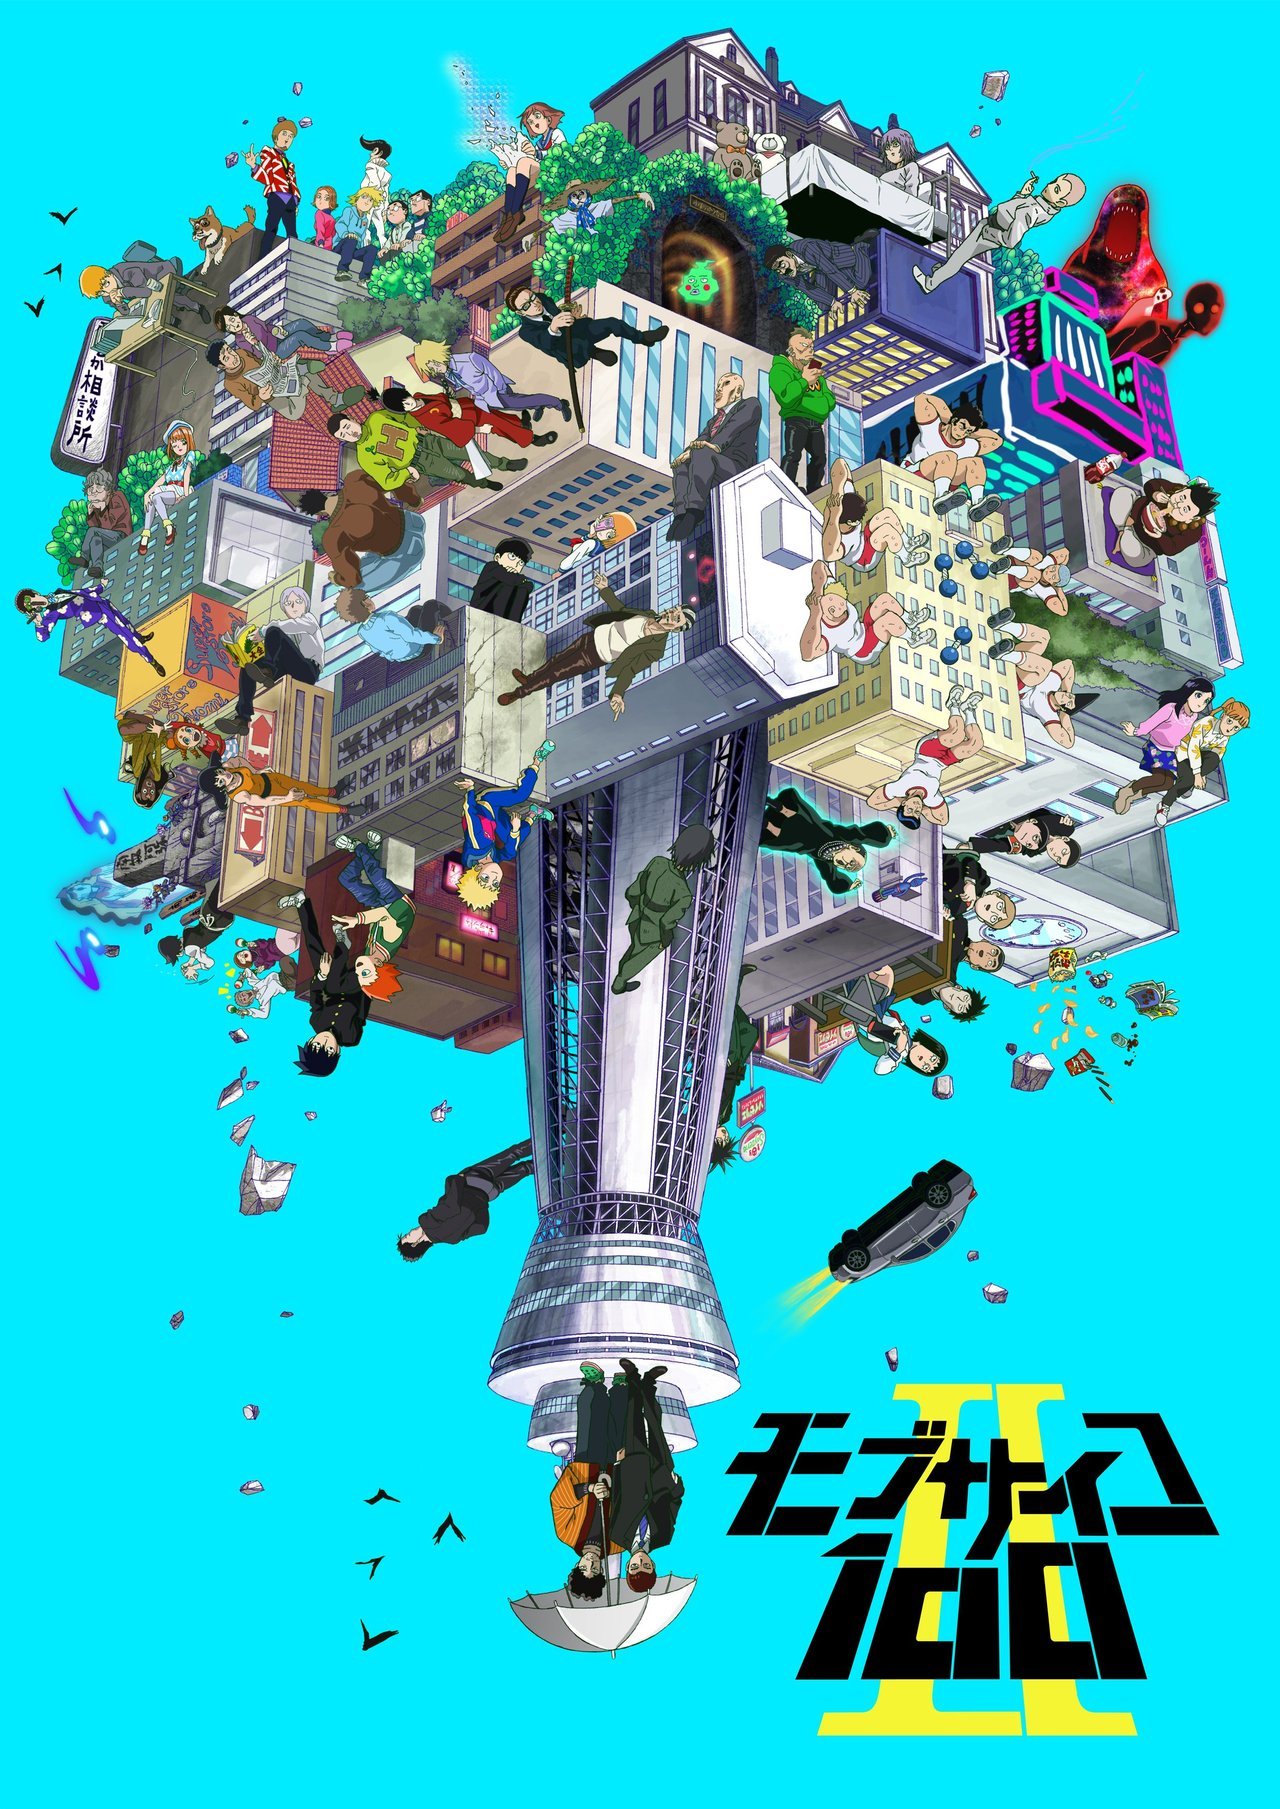 A new key visual for the âMob Psycho 100 IIâ TV anime has been unveiled on its website. The series will premiere January 7th, 2019 (Bones)